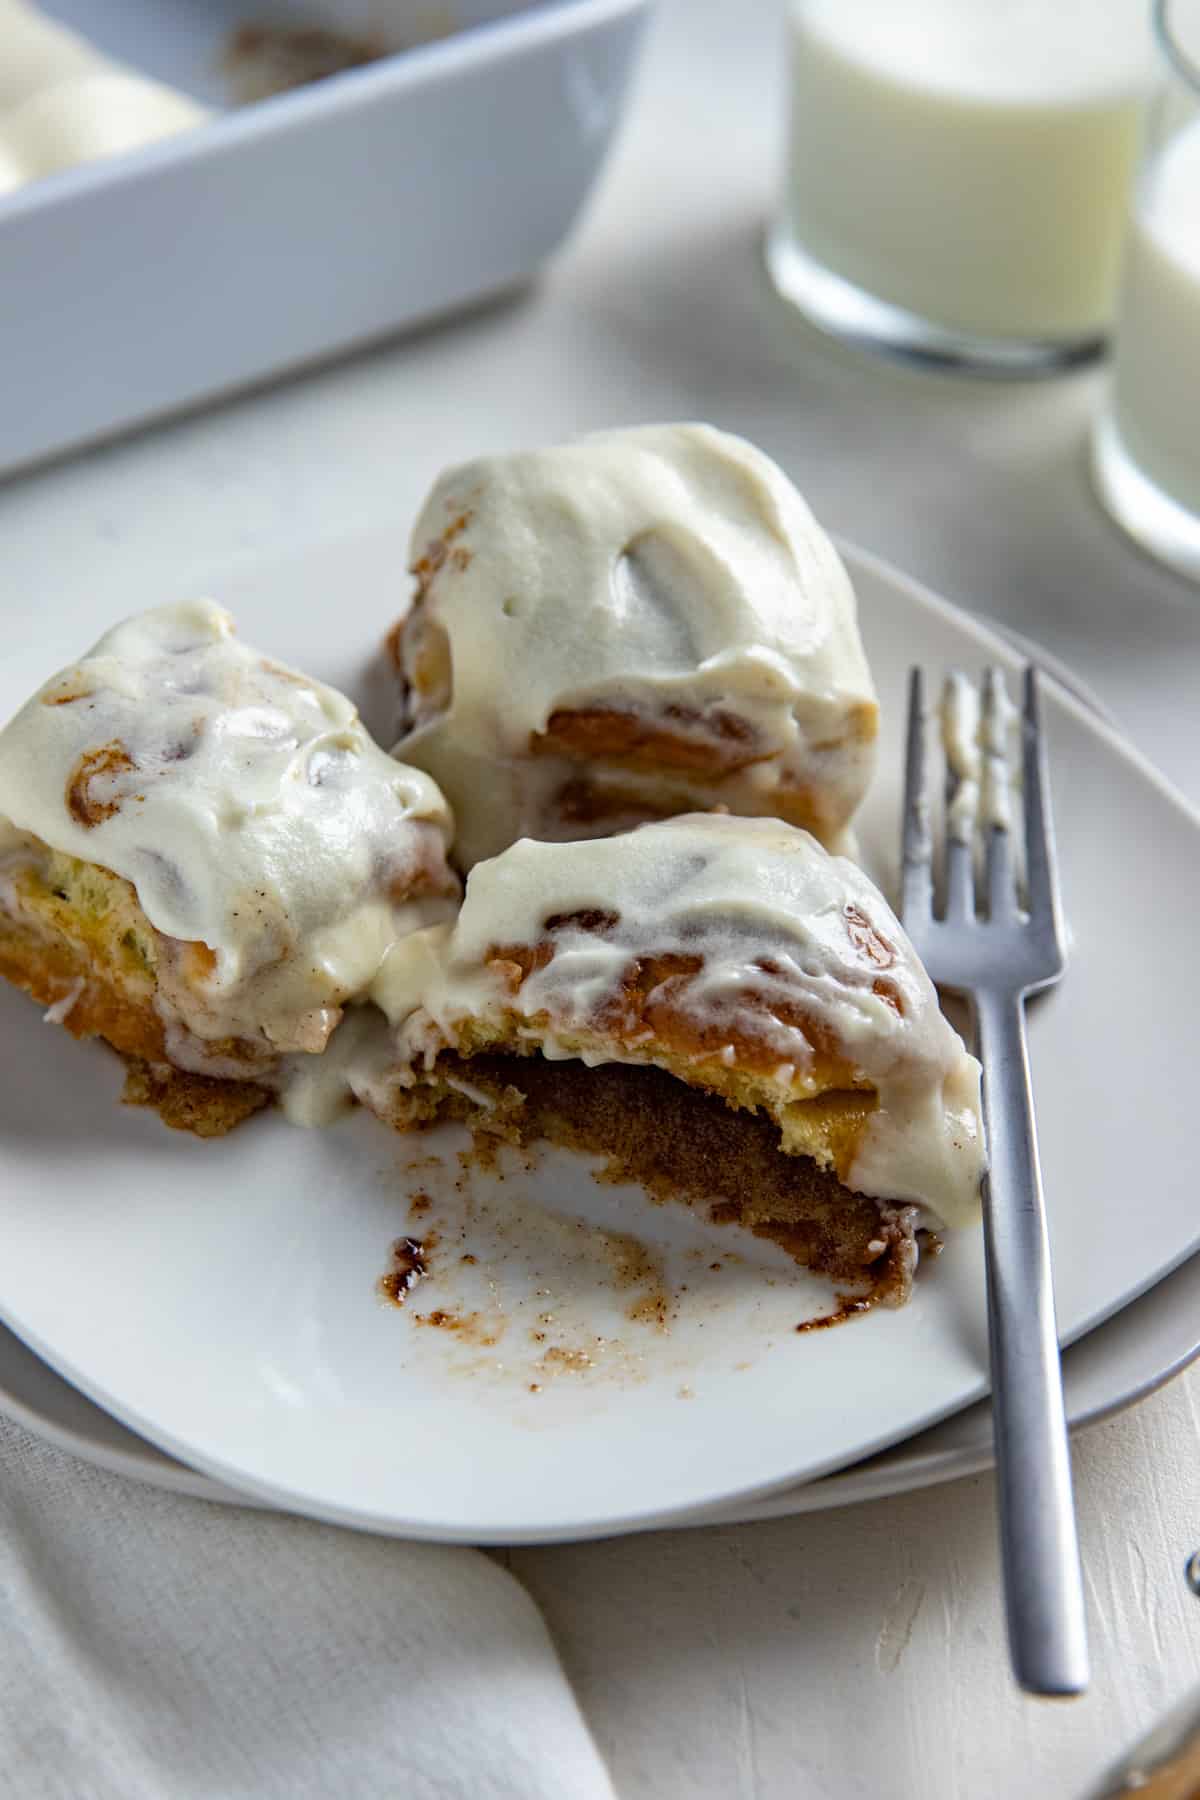 Three Hawaiian Roll Cinnamon Rolls on a square white plate with a fork on the side and a glass of milk in the background.